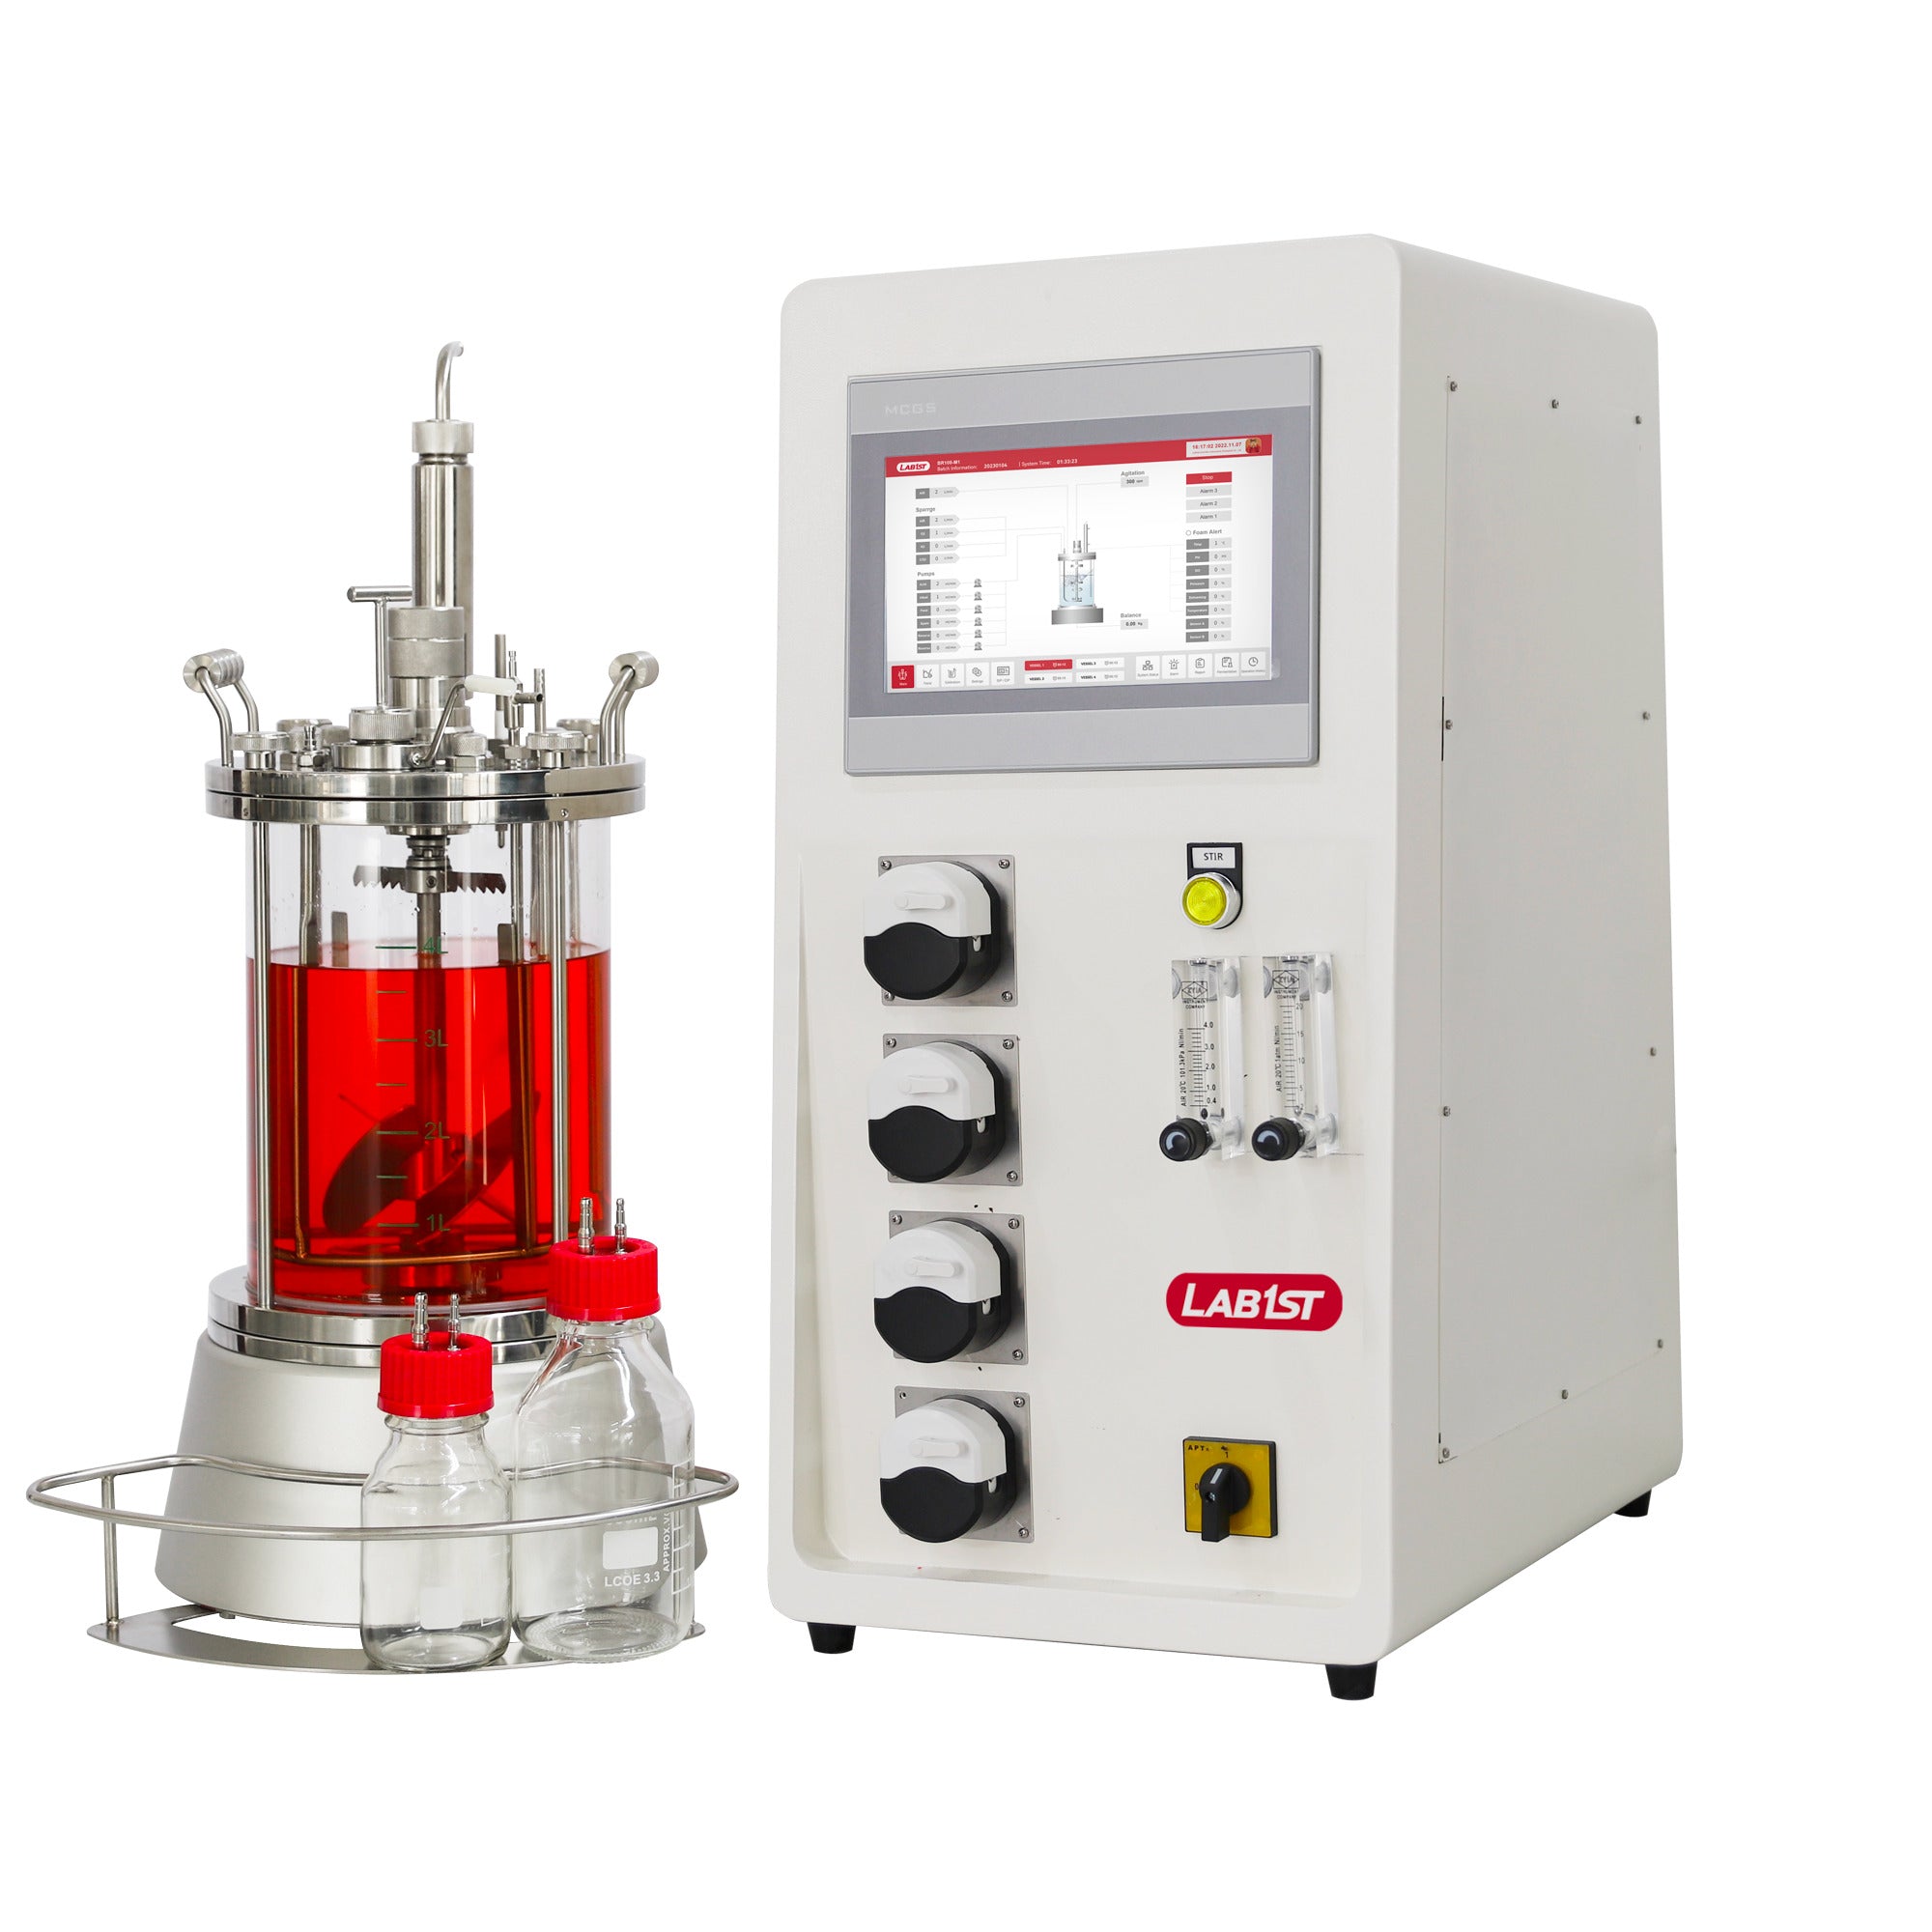 10L Benchtop Bioreactor for Microbial Fermentation with 2 Gas Inlets BR100-M1